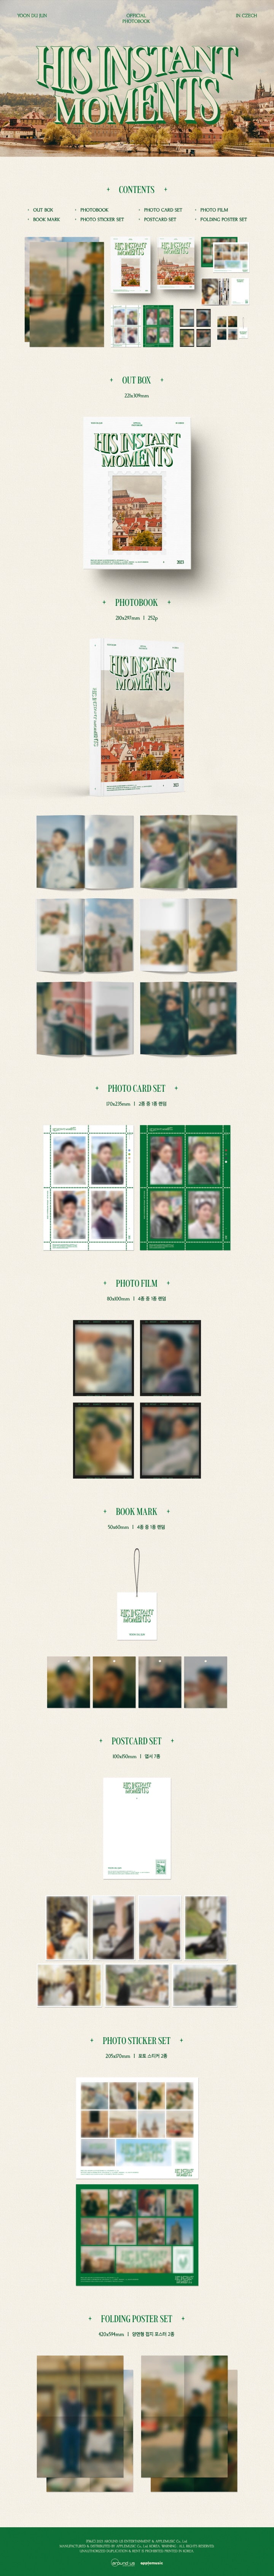 1 Photo Book (252 pages)
1 Photo Card Set (random out of 2 sets)
1 Photo Film (random out of 4 types)
1 Bookmark (random o...